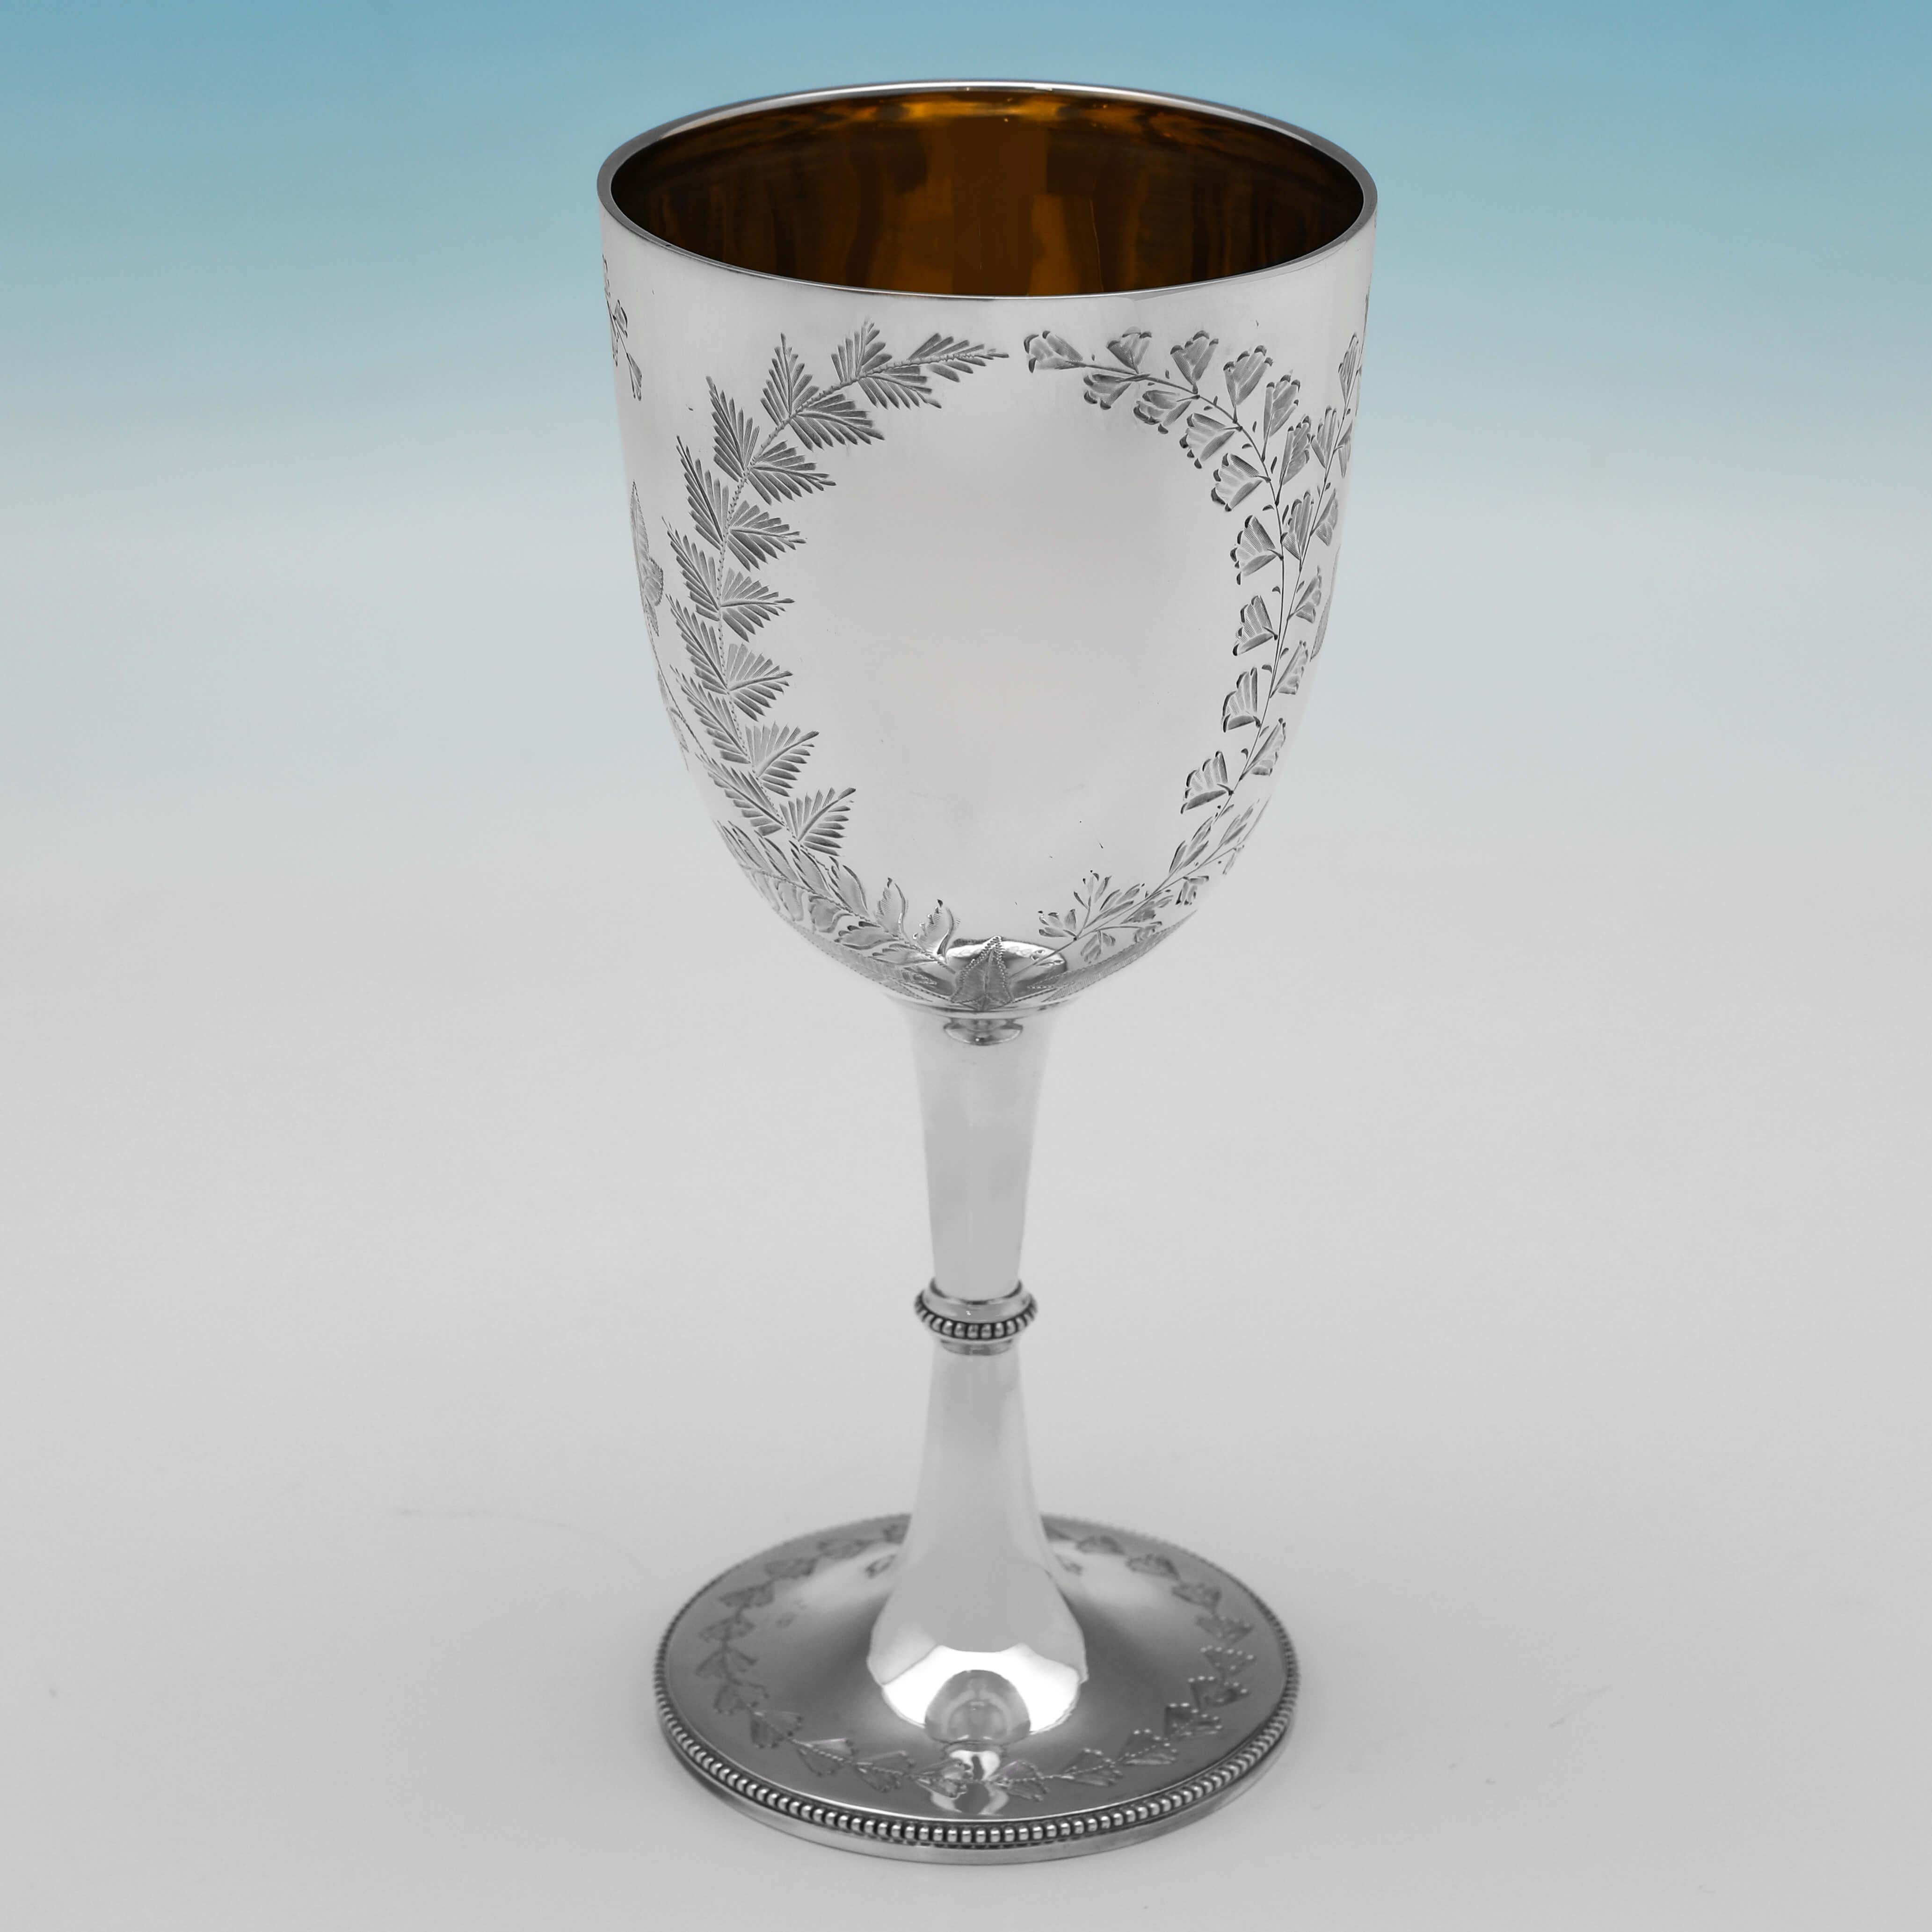 Hallmarked in Sheffield in 1883 and 1884 by Henry Atkin, this attractive pair of Victotian, Antique Sterling Silver Goblets, feature fern engraved decoration, bead borders, and gilt interiors. 

Each goblet measures 7